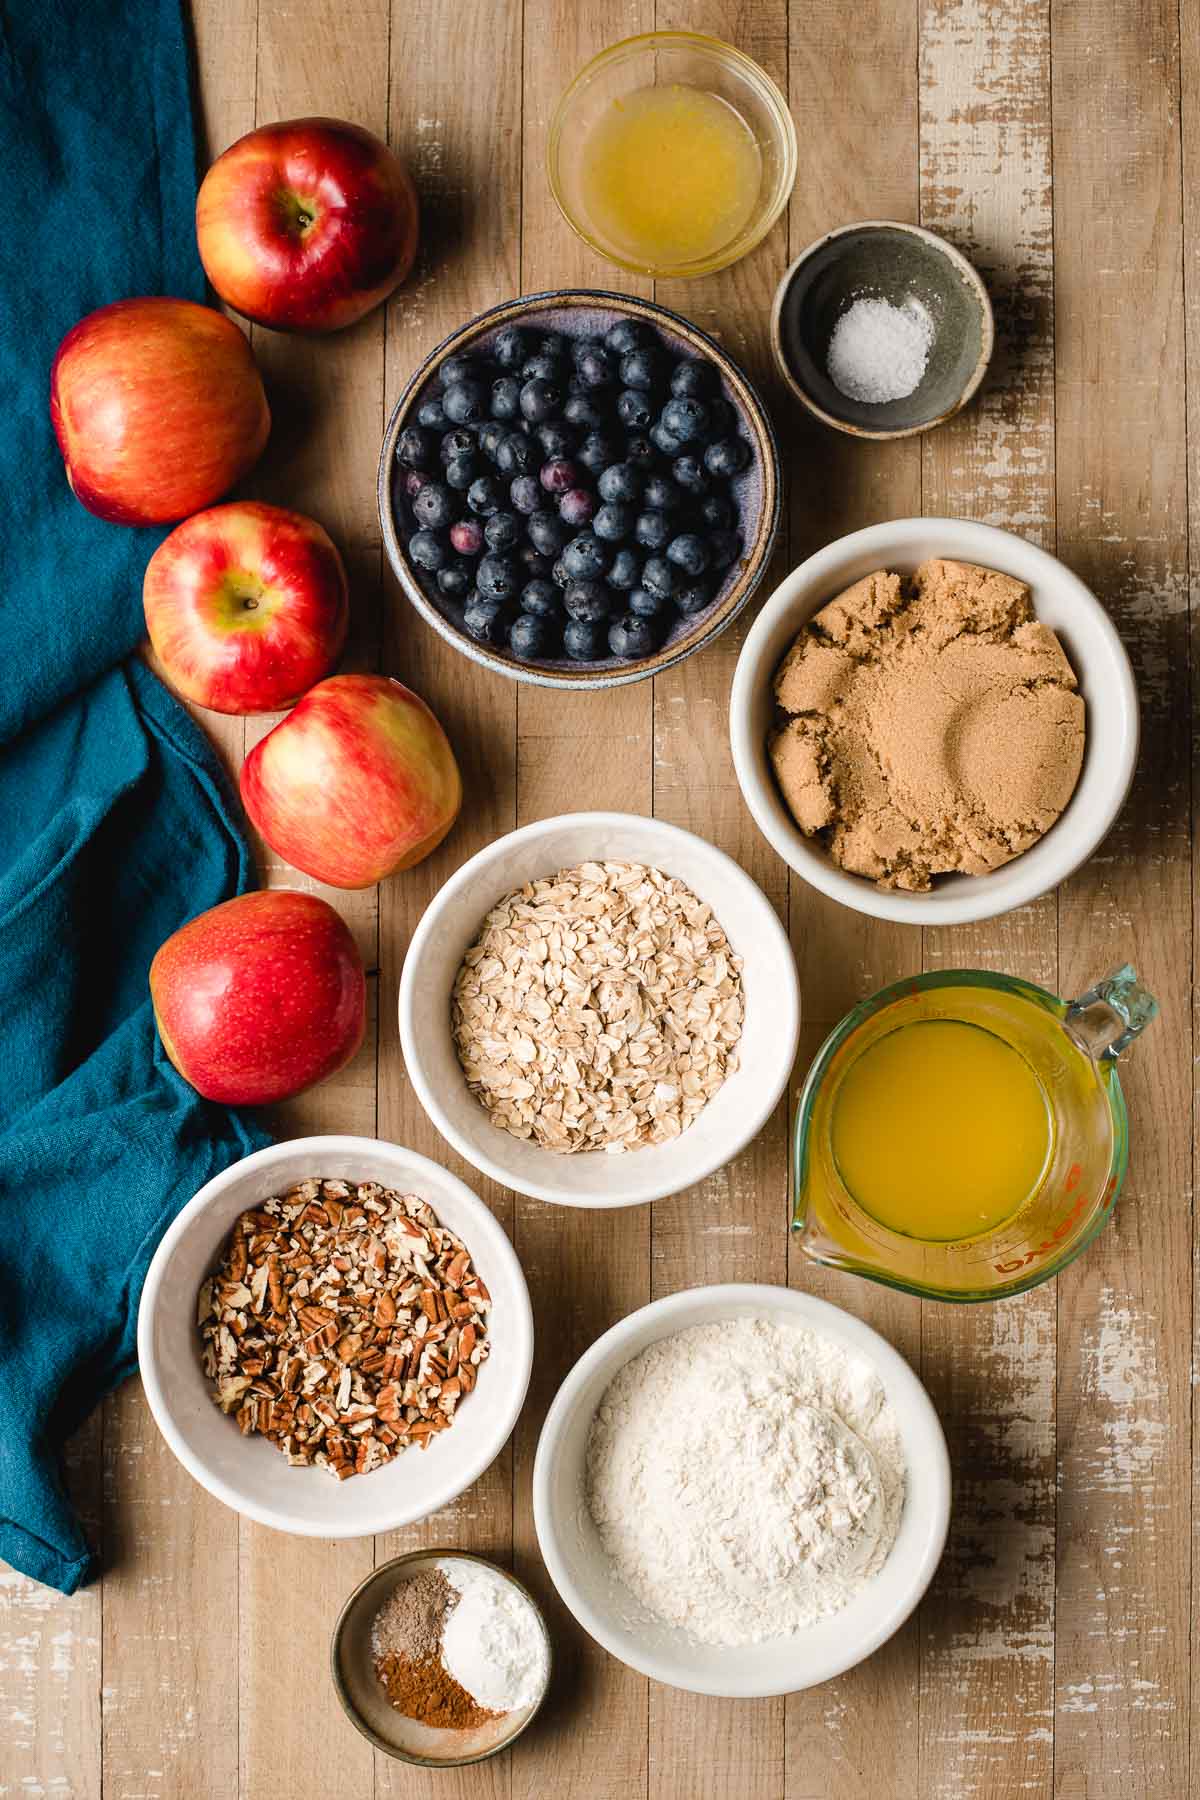 Apples, blueberries, brown sugar, oats, pecans, flour, butter, cinnamon, cardamom, and lemon displayed in bowls on a wood background.